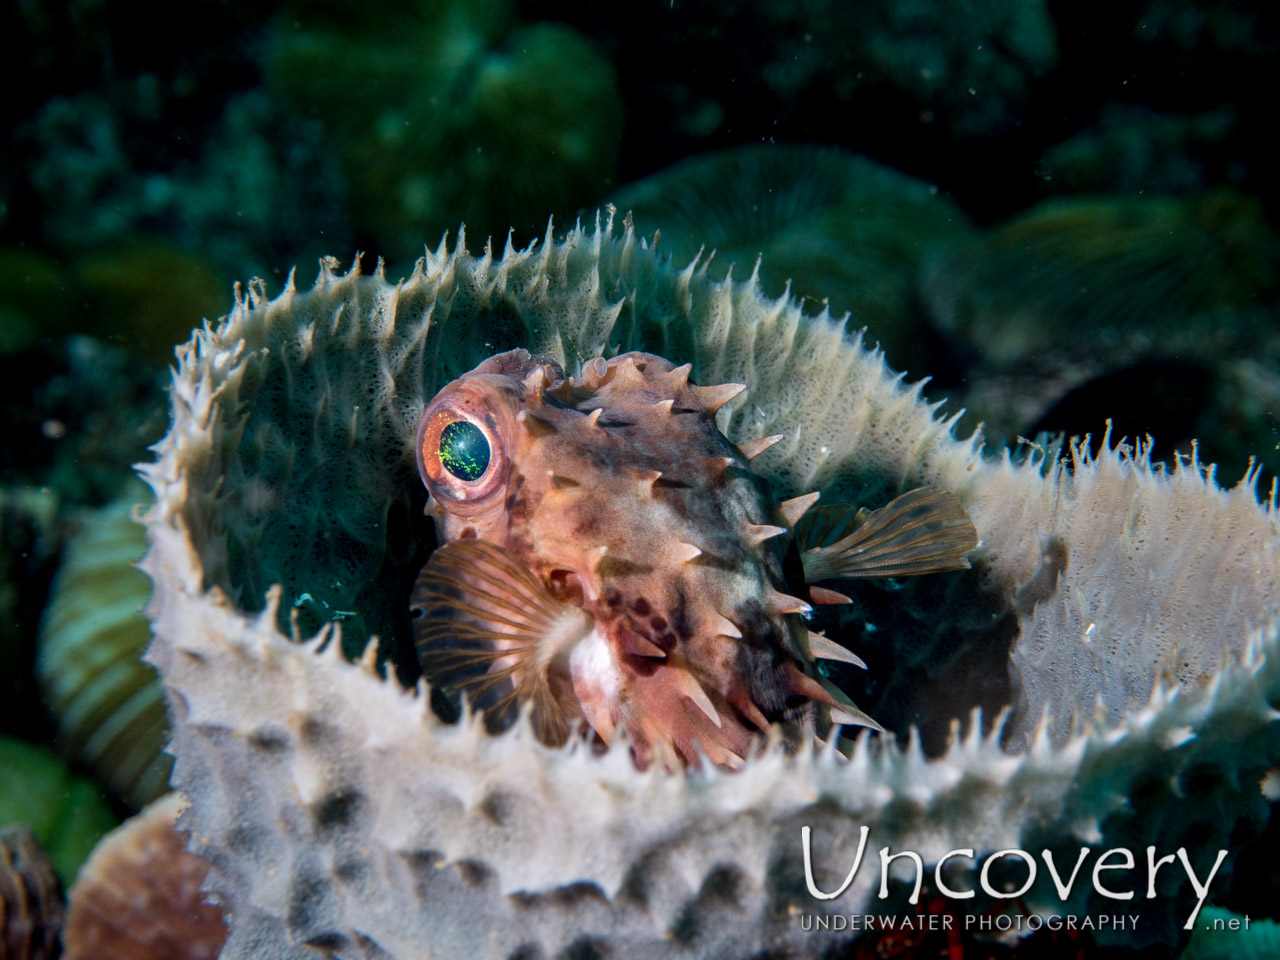 Porcupine Pufferfish (diodon Holocanthus), photo taken in Indonesia, North Sulawesi, Lembeh Strait, Makawide 3